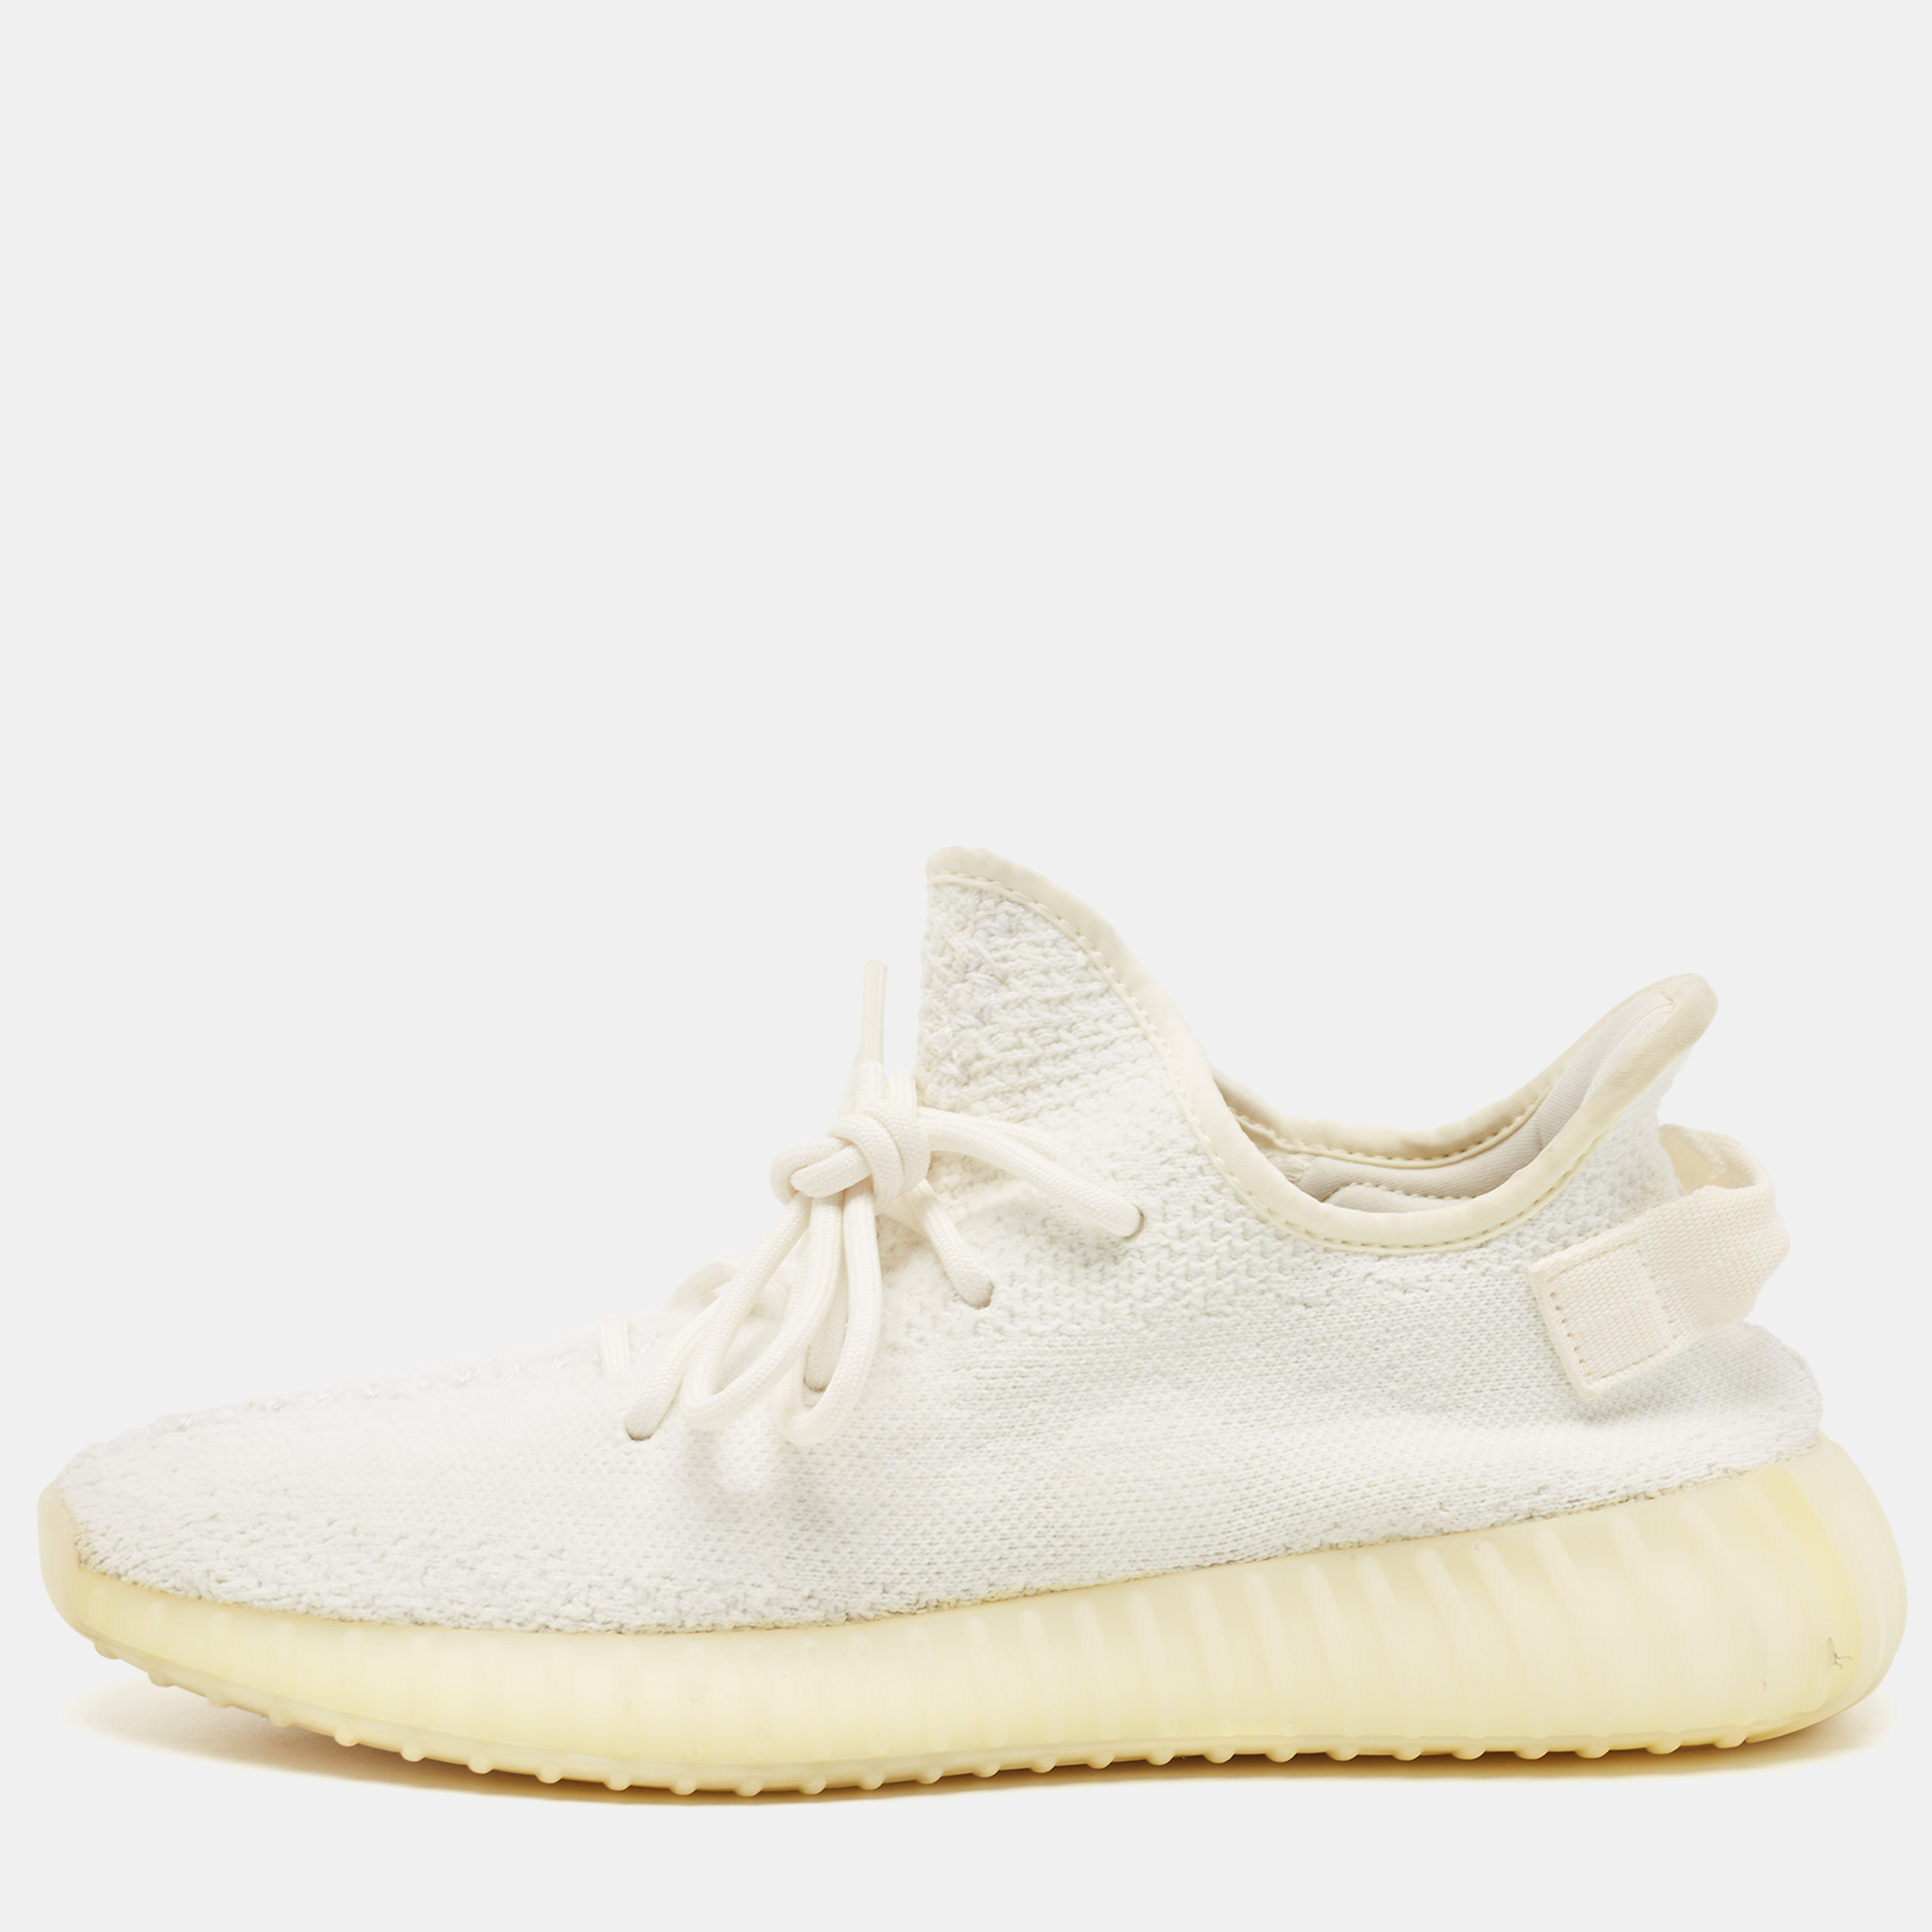 Pre-owned Yeezy Adidas X  White Cotton Knit Fabric Boost 350 V2 Triple White Trainers Size 43 1/3